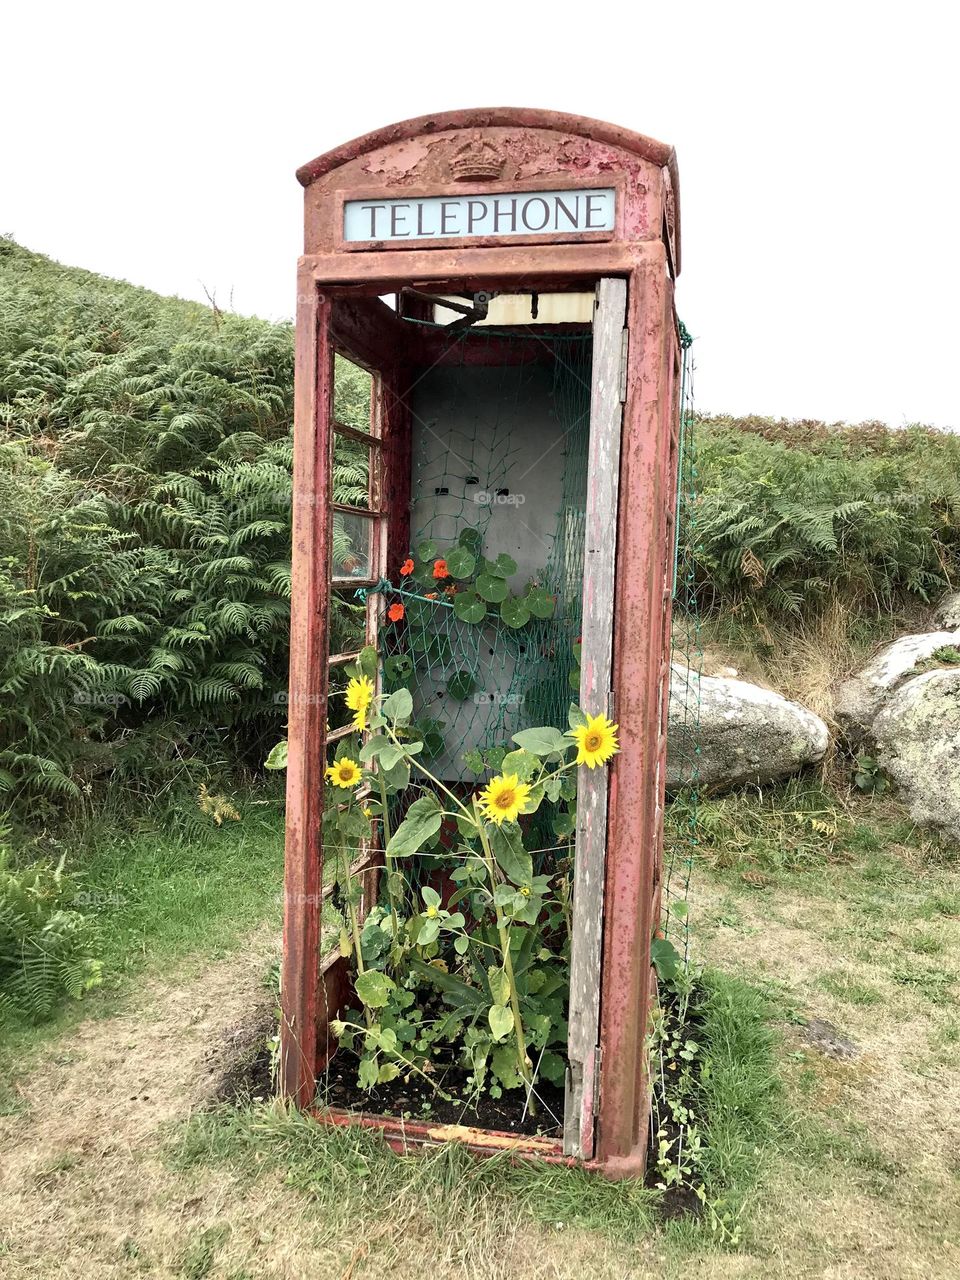 Sunflower-filled telephone box on Bryher in the Isles of Scilly